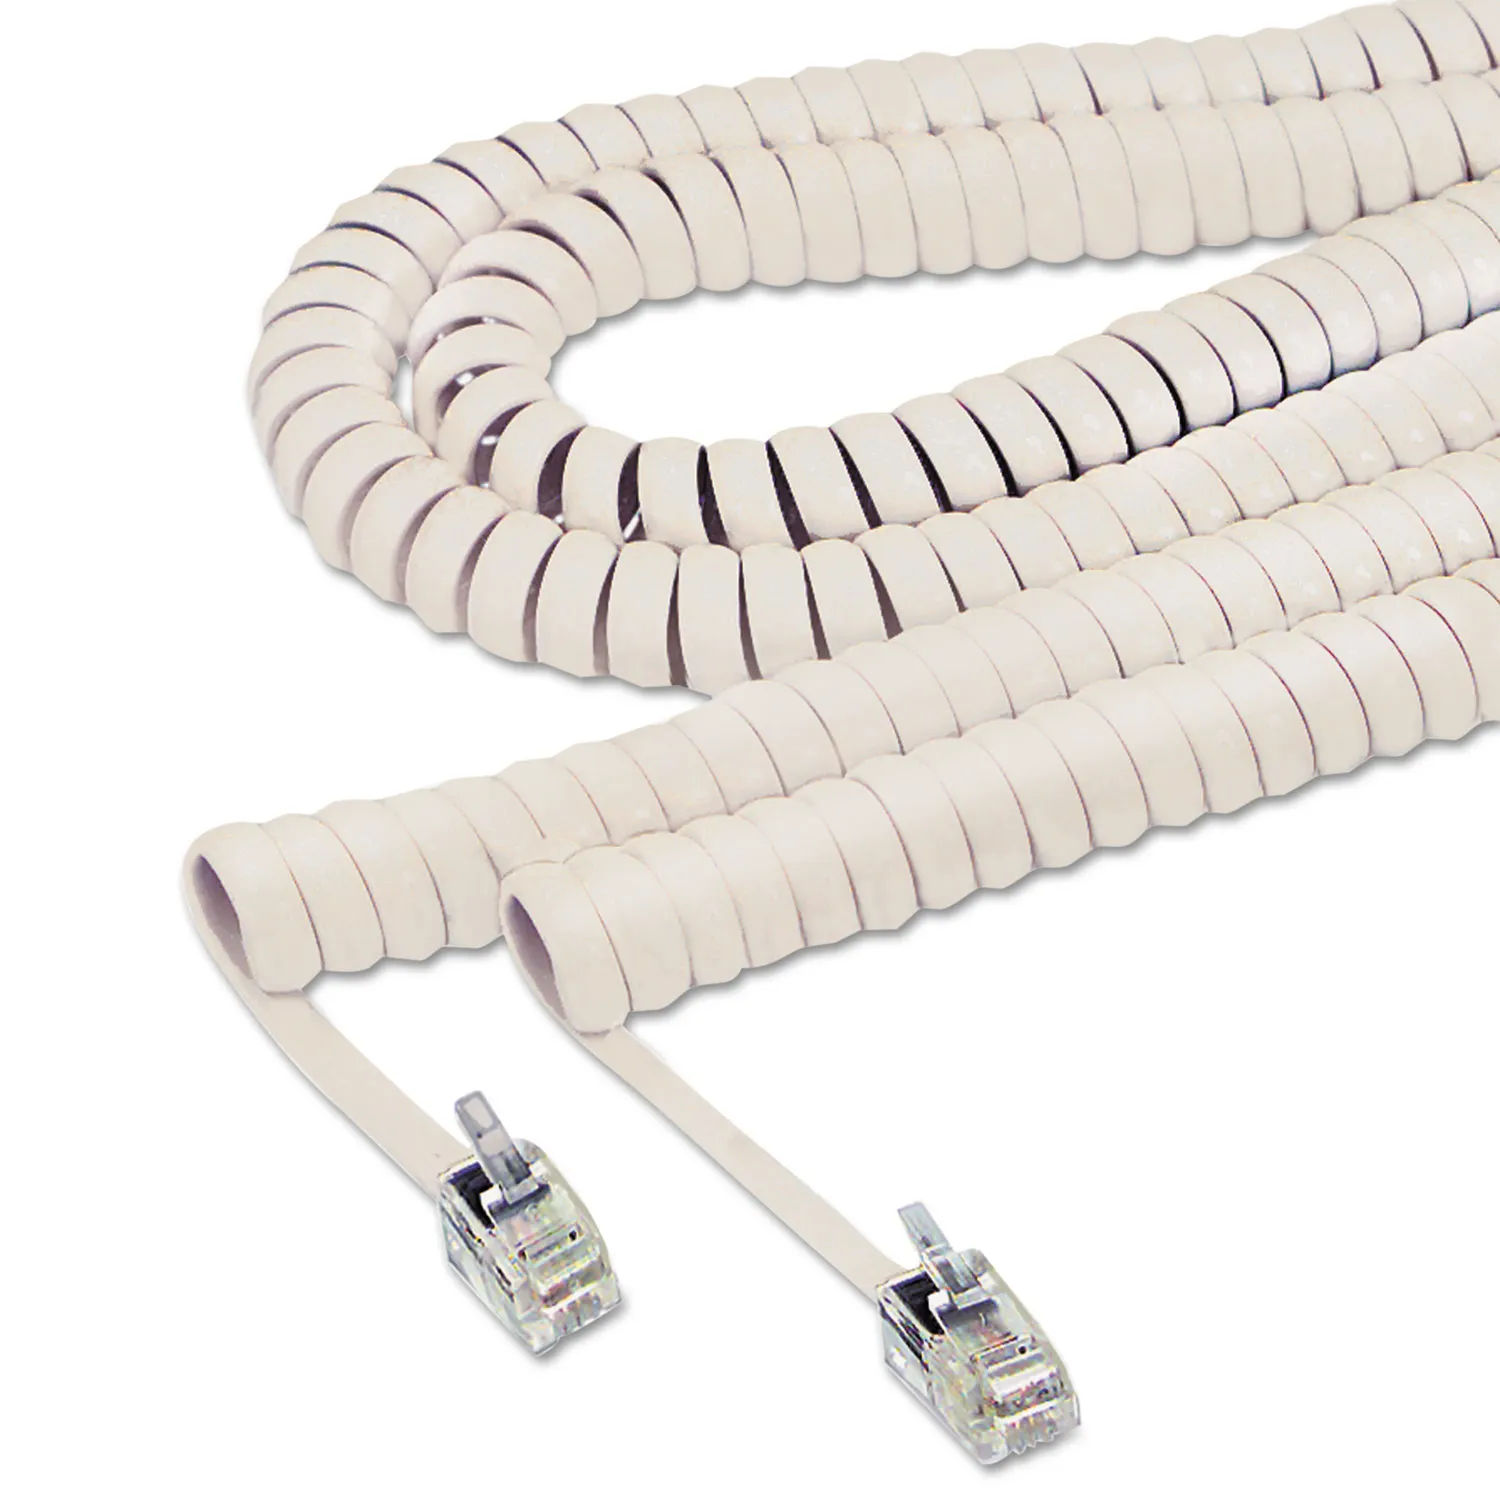 PHONE CORD COILED 12FT IVORY